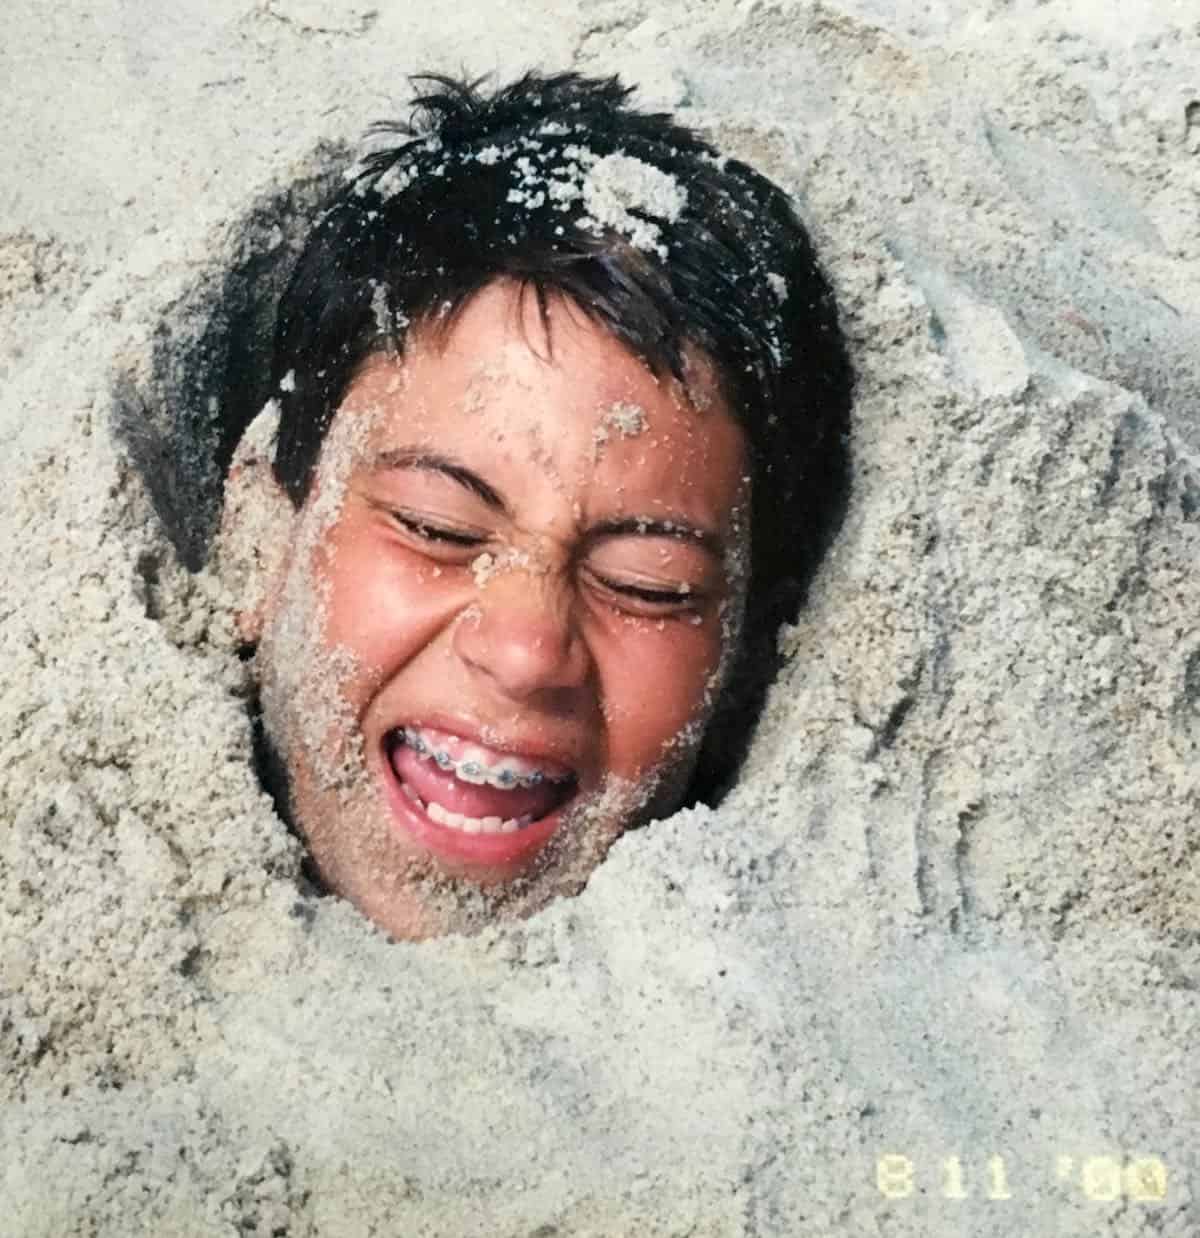 Young William buried in the beach sand.